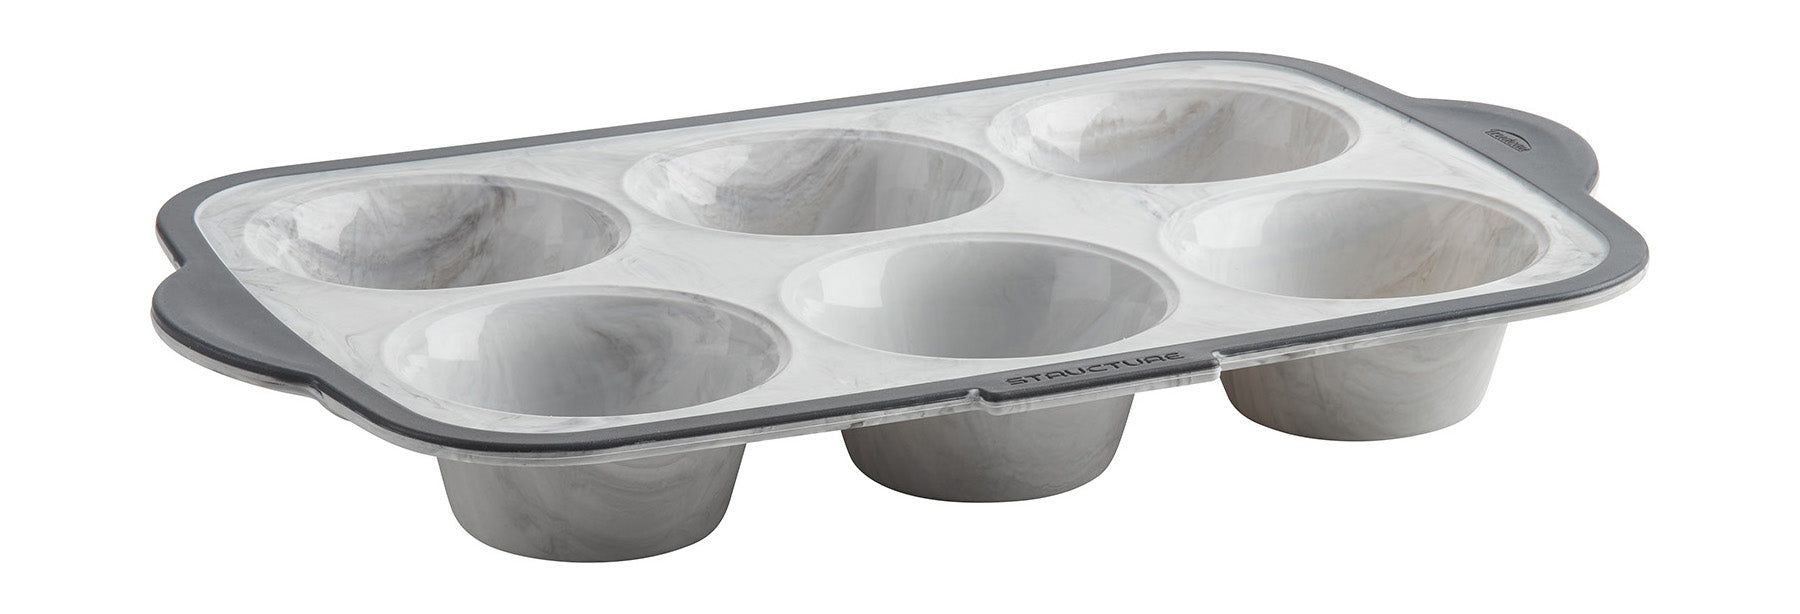 Trudeau Structure Silicone Pro Standard 6 Cavity Muffin Pan, Marble